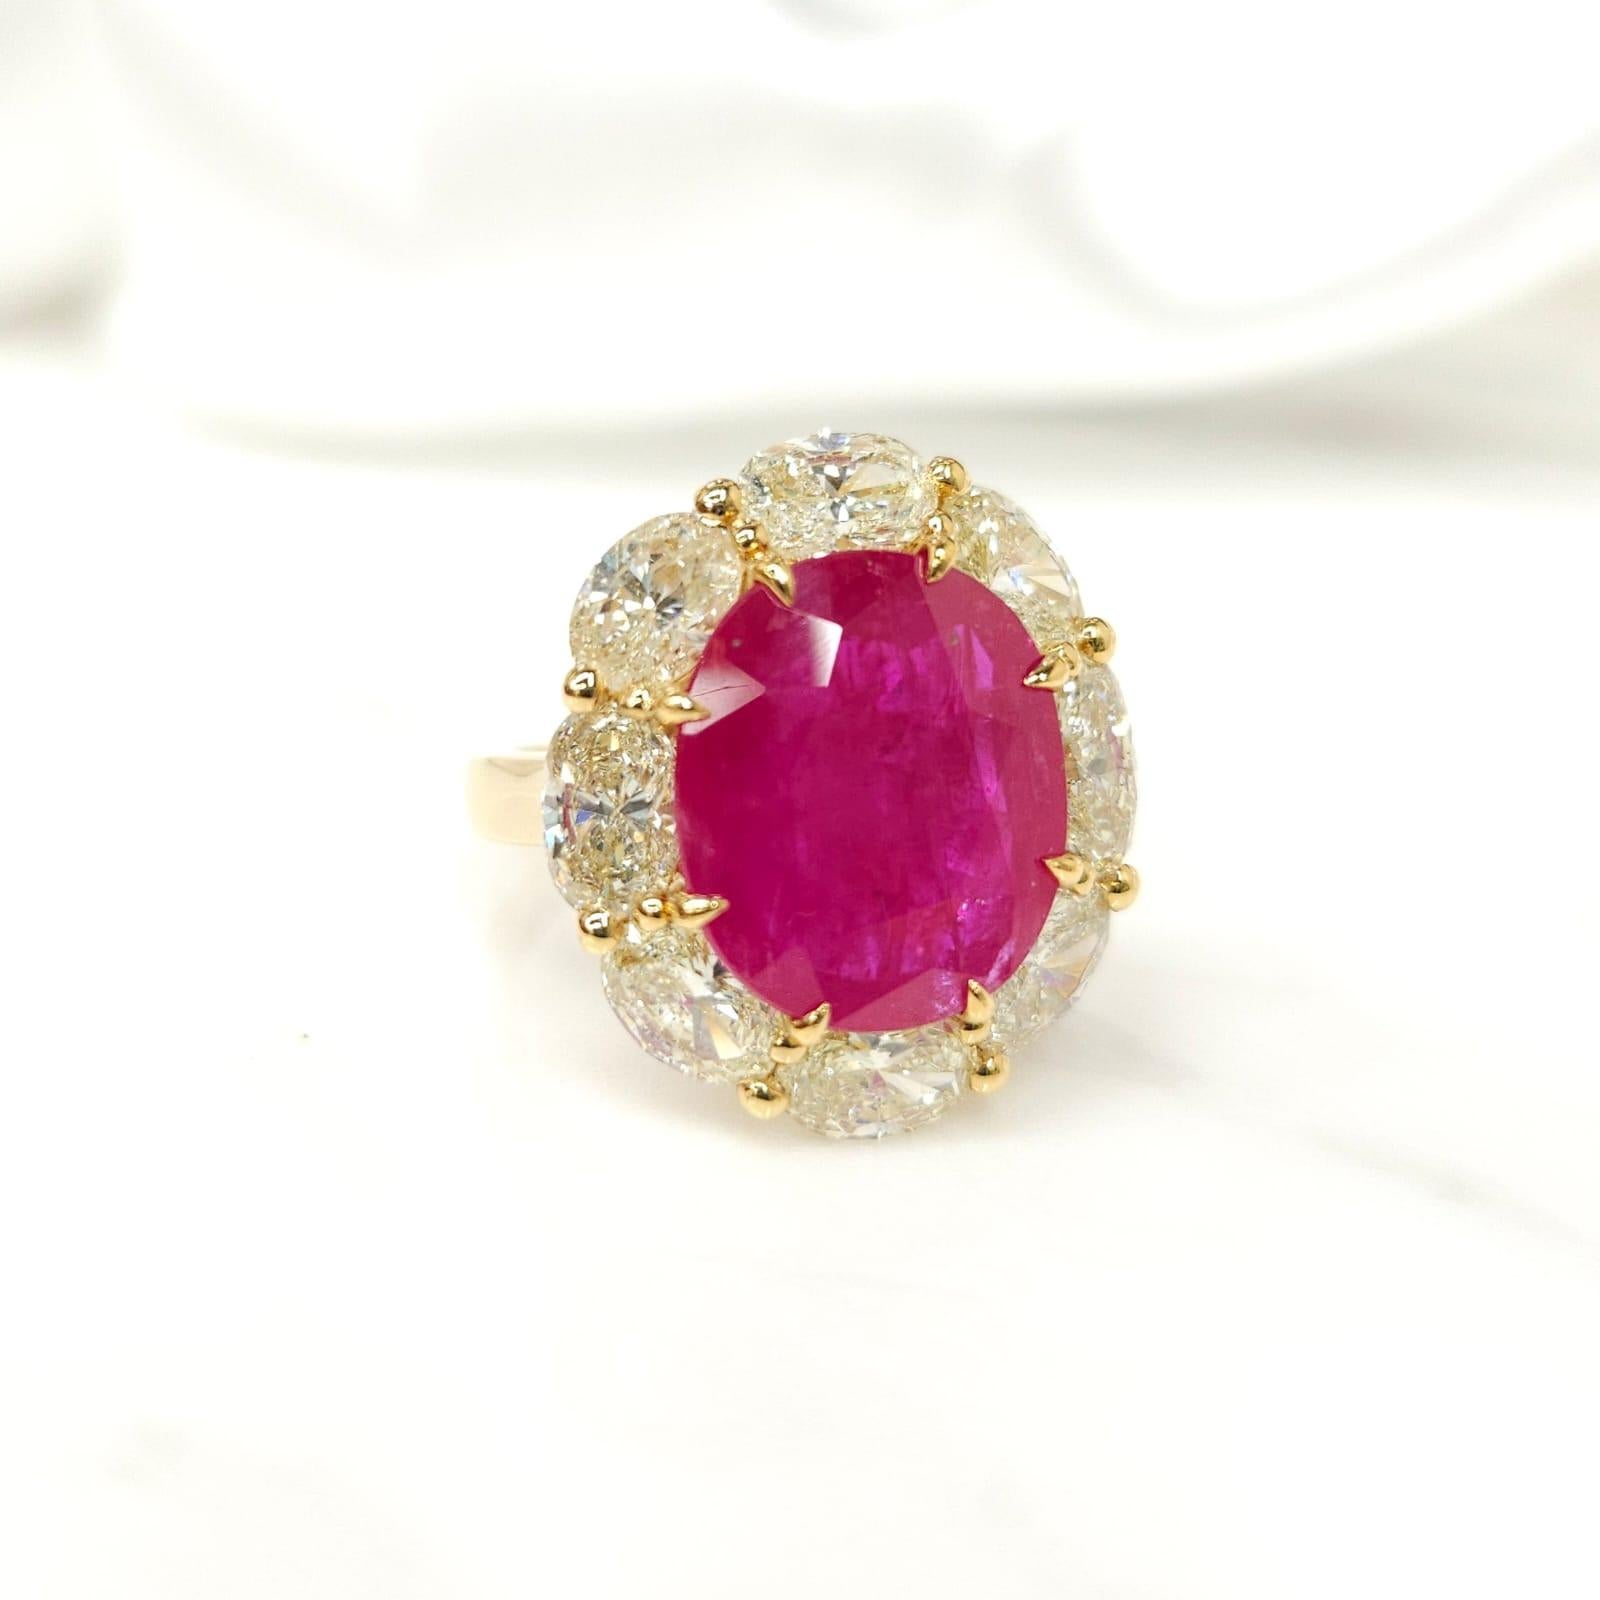 IGI Certified 6.53 Carat Ruby & 3.71 Carat Oval Diamond Ring in 18K Yellow Gold For Sale 12